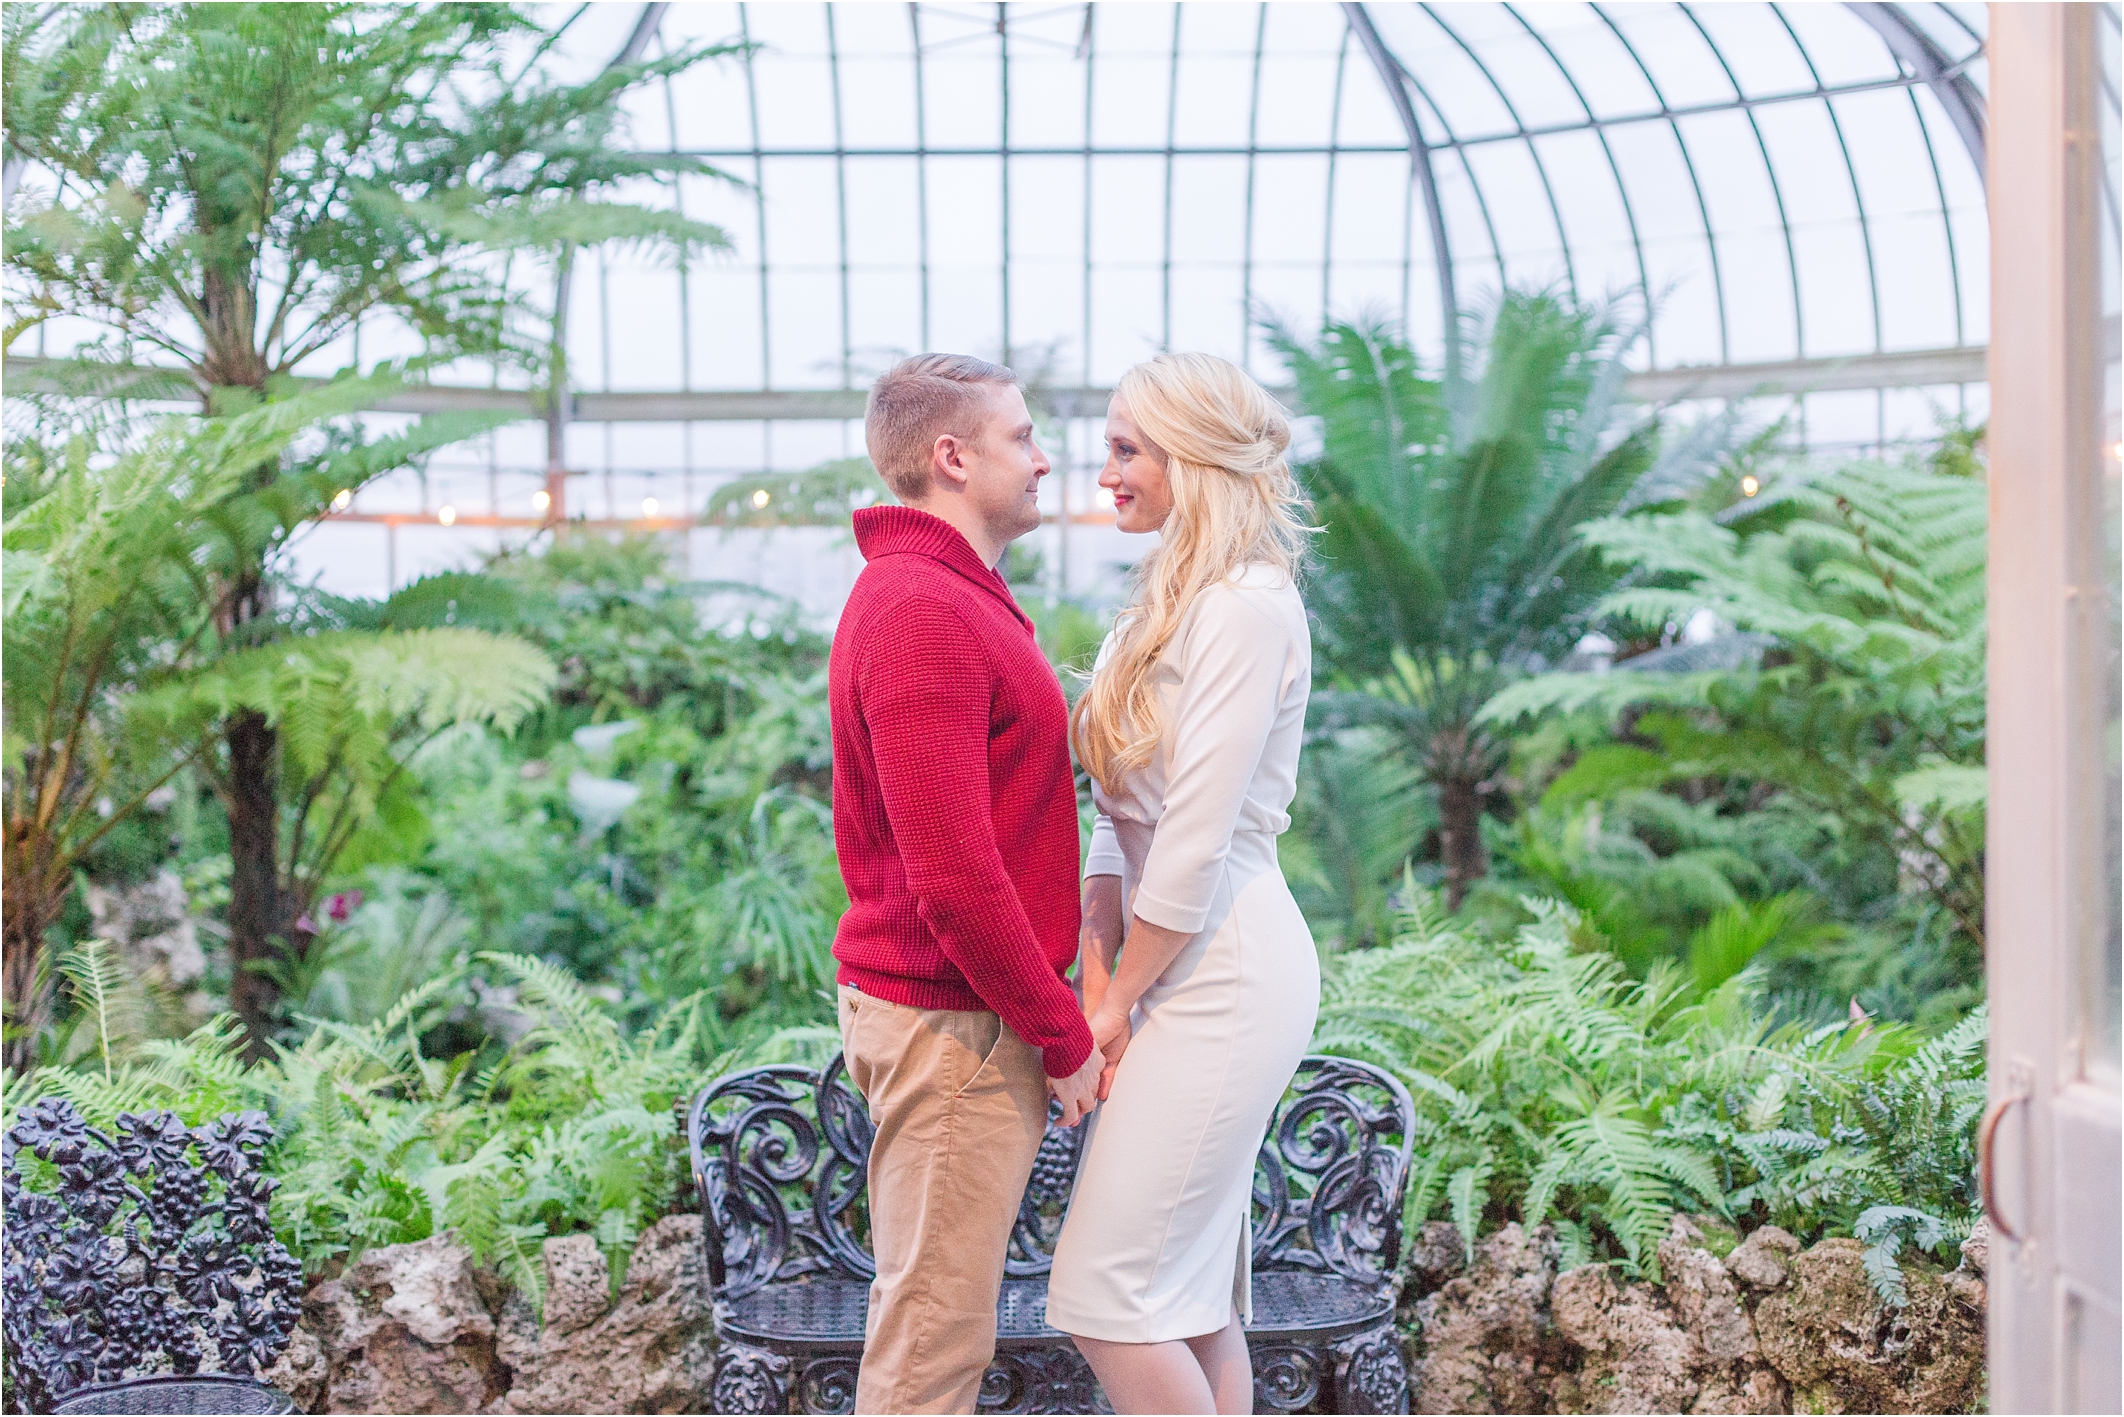 elegant-classic-belle-isle-conservatory-engagement-photos-in-detroit-mi-by-courtney-carolyn-photography_0023.jpg